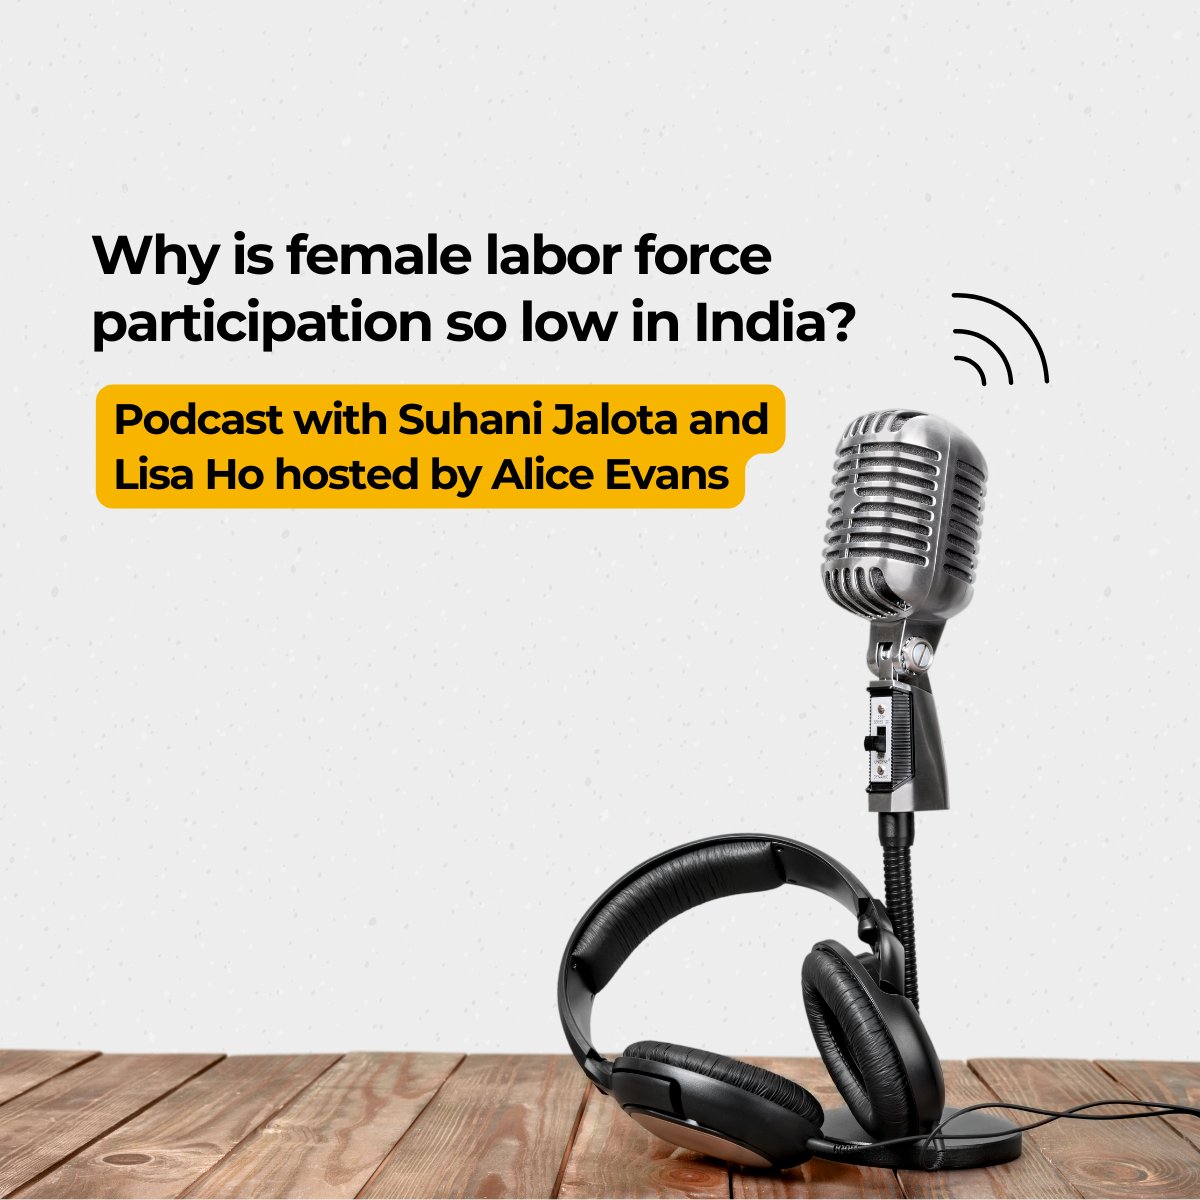 🎧 Excited to listen to this podcast featuring two of our grantees! We are thrilled to hear Suhani Jalota and Lisa Ho share their research findings on female #labor force participation in India. @MynaMahila @MIT